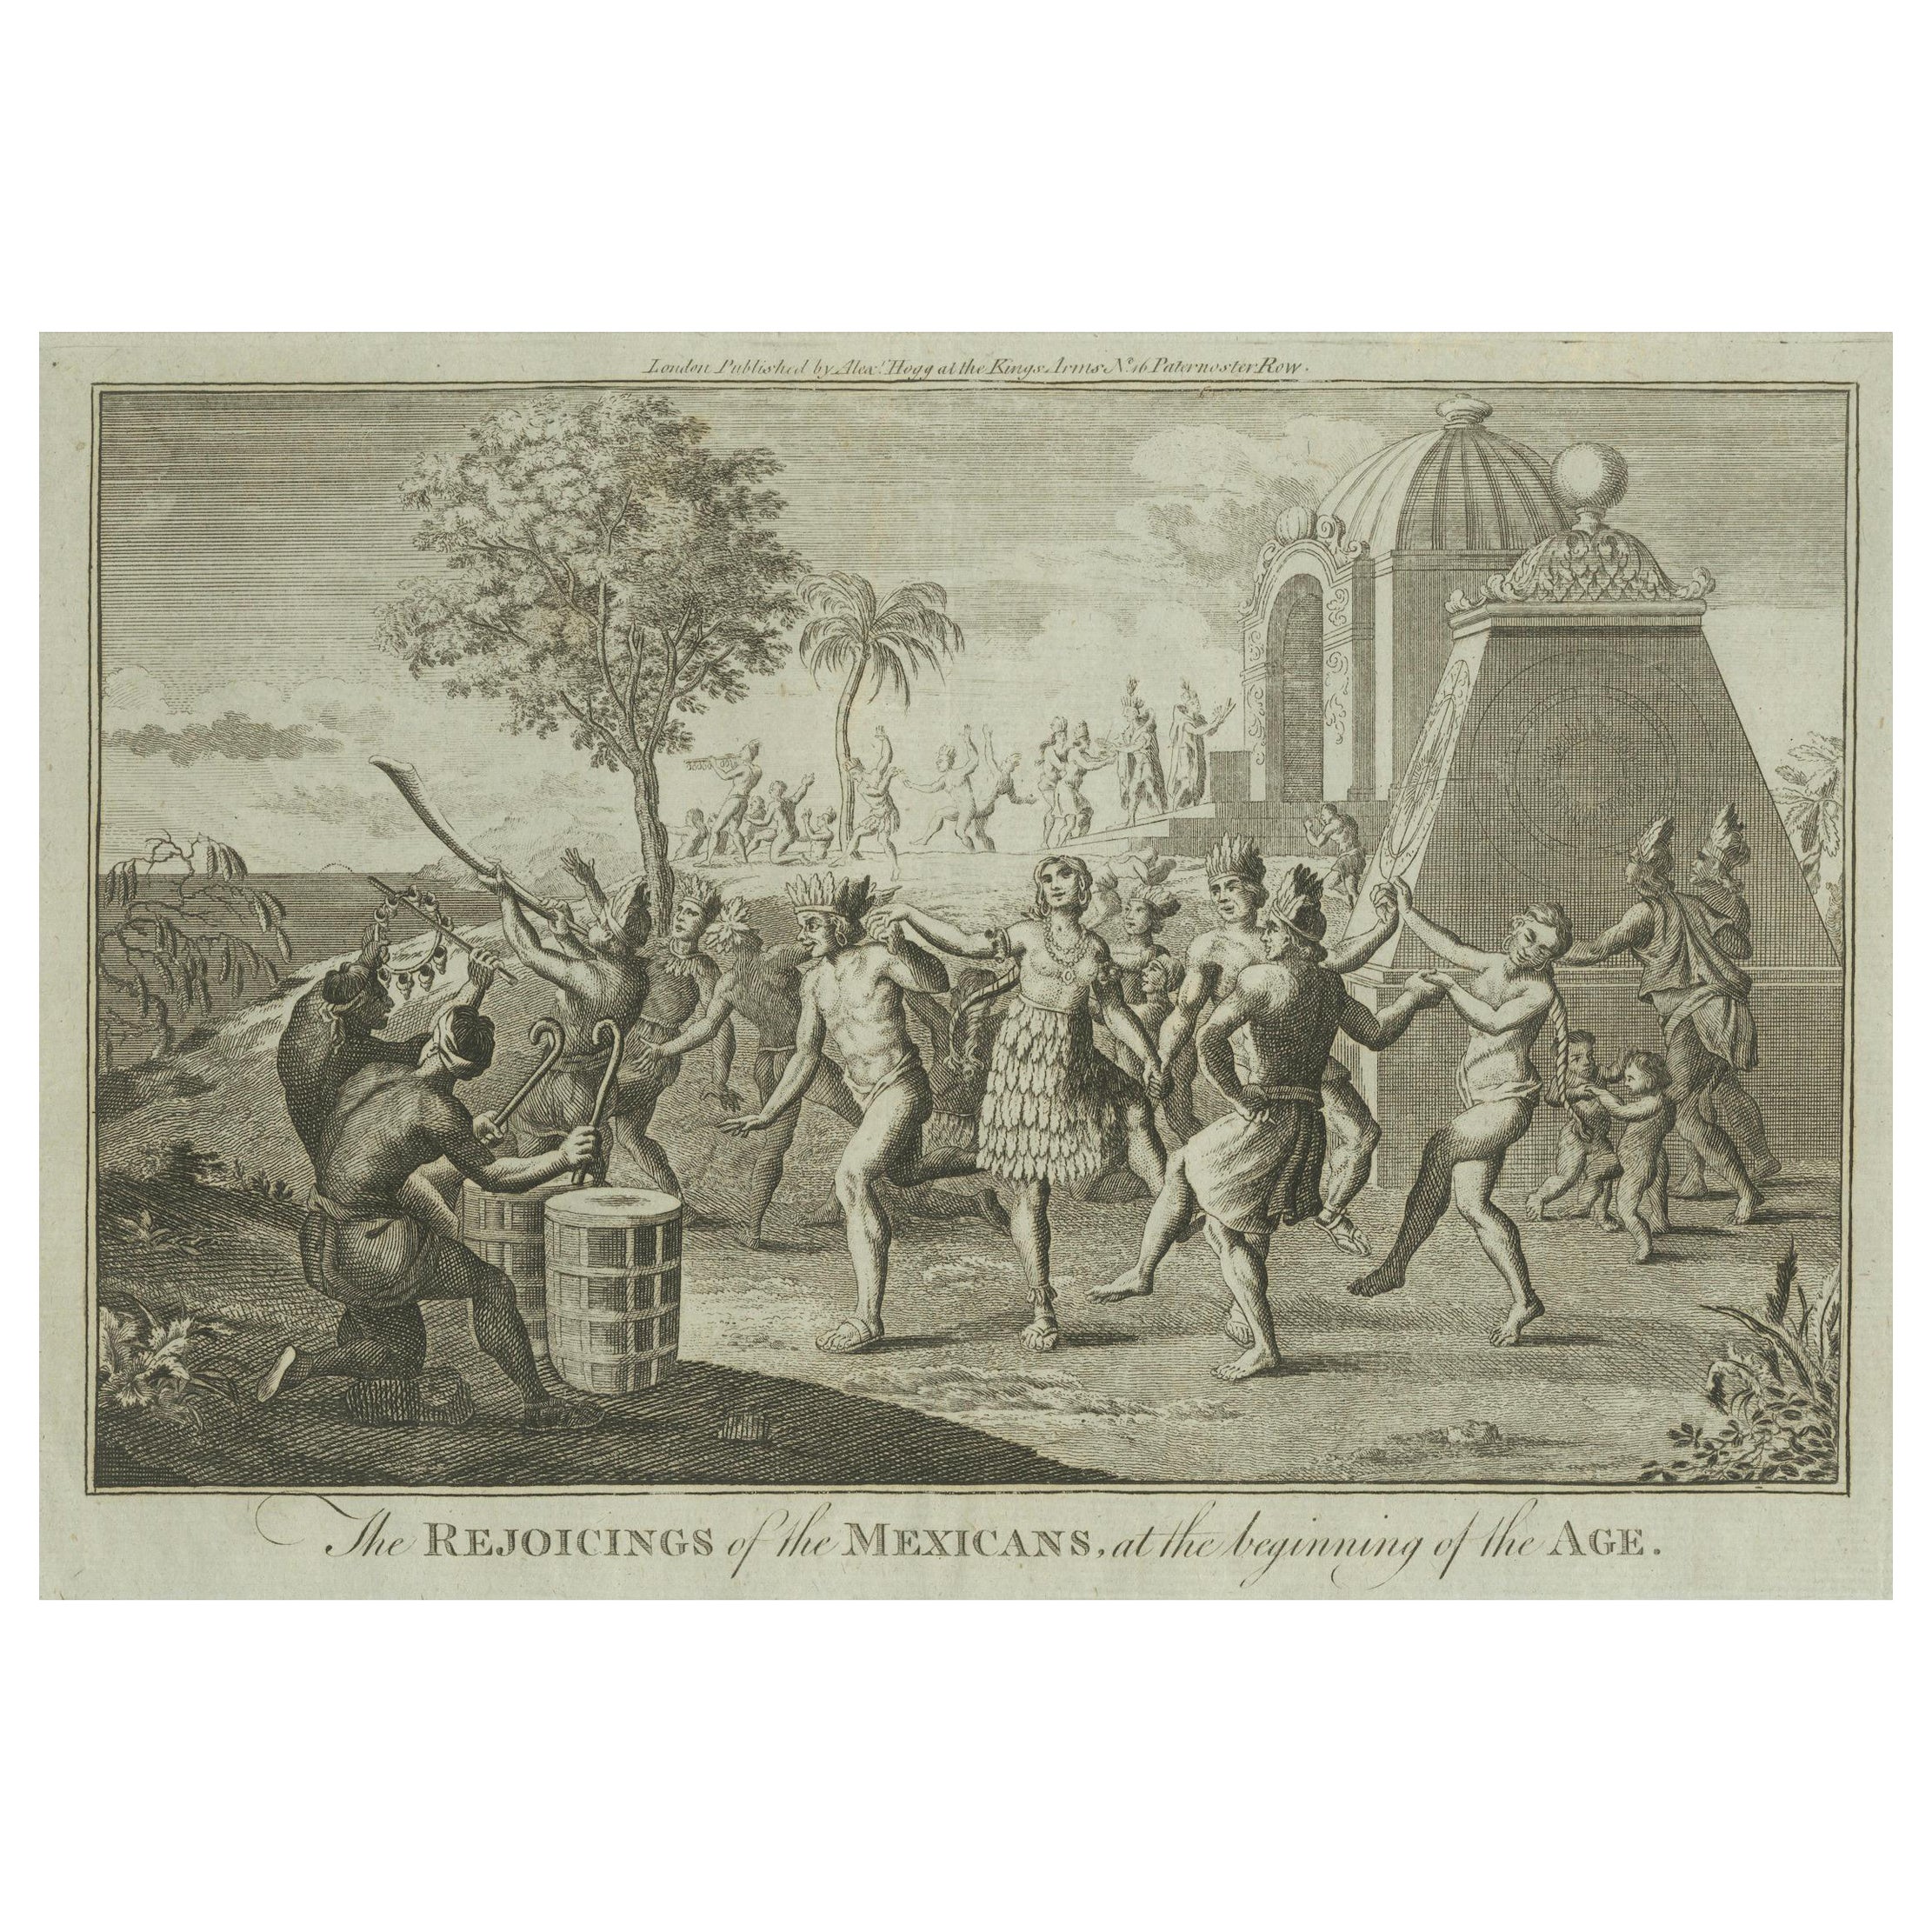 Old Engraving of Mexican Festivities and Rituals in the Age of Discovery, 1794